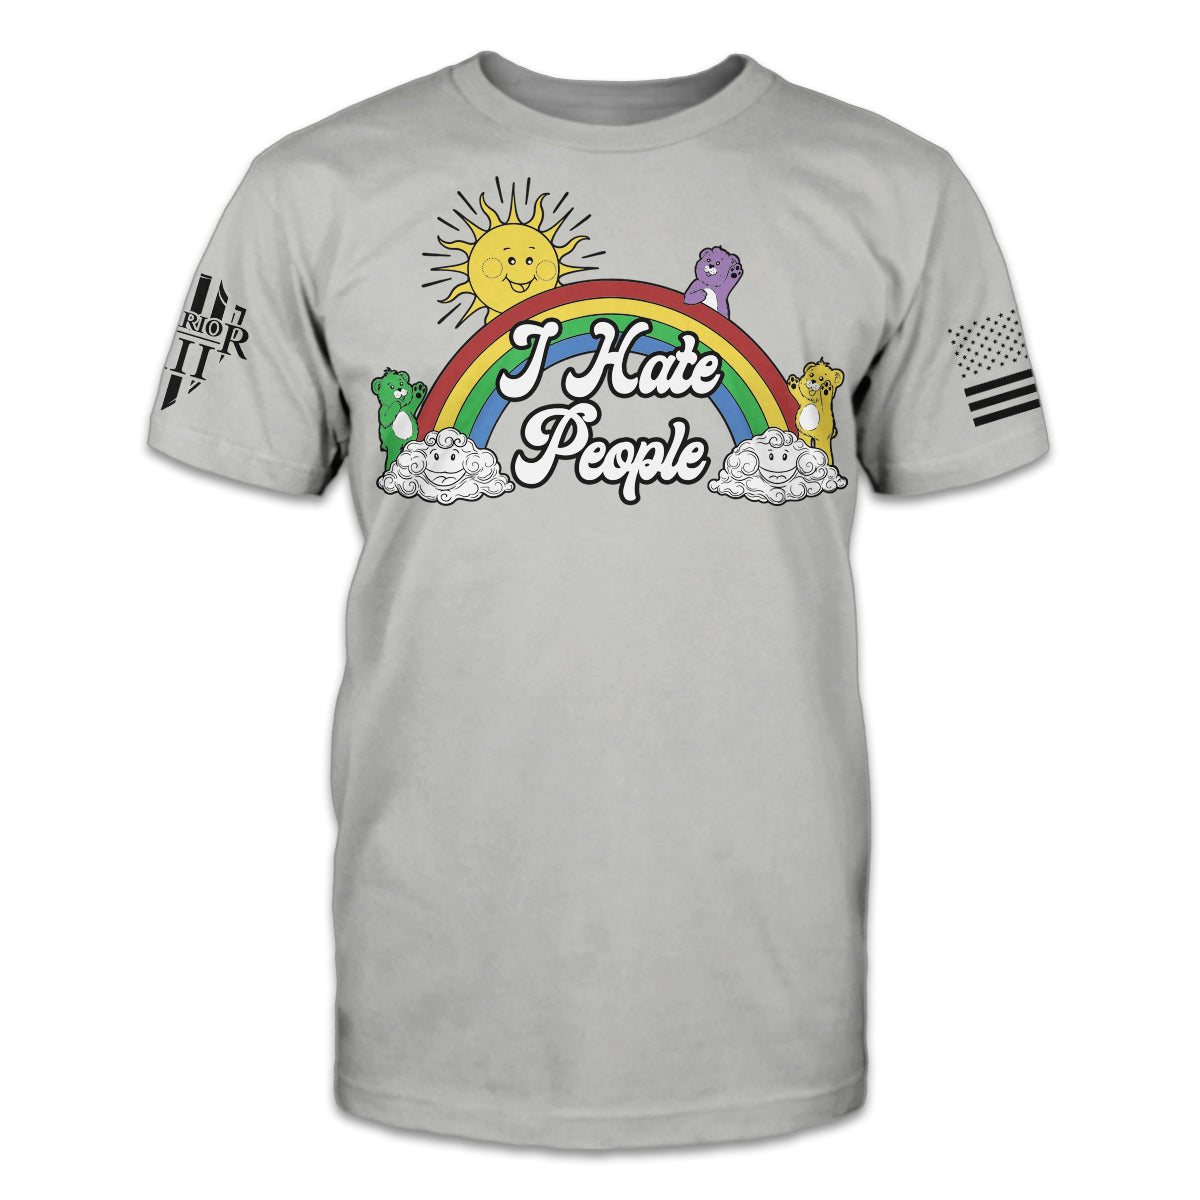 A grey t-shirt with the words "I Hate People" with bears, rainbow and clouds printed on the front of the shirt.